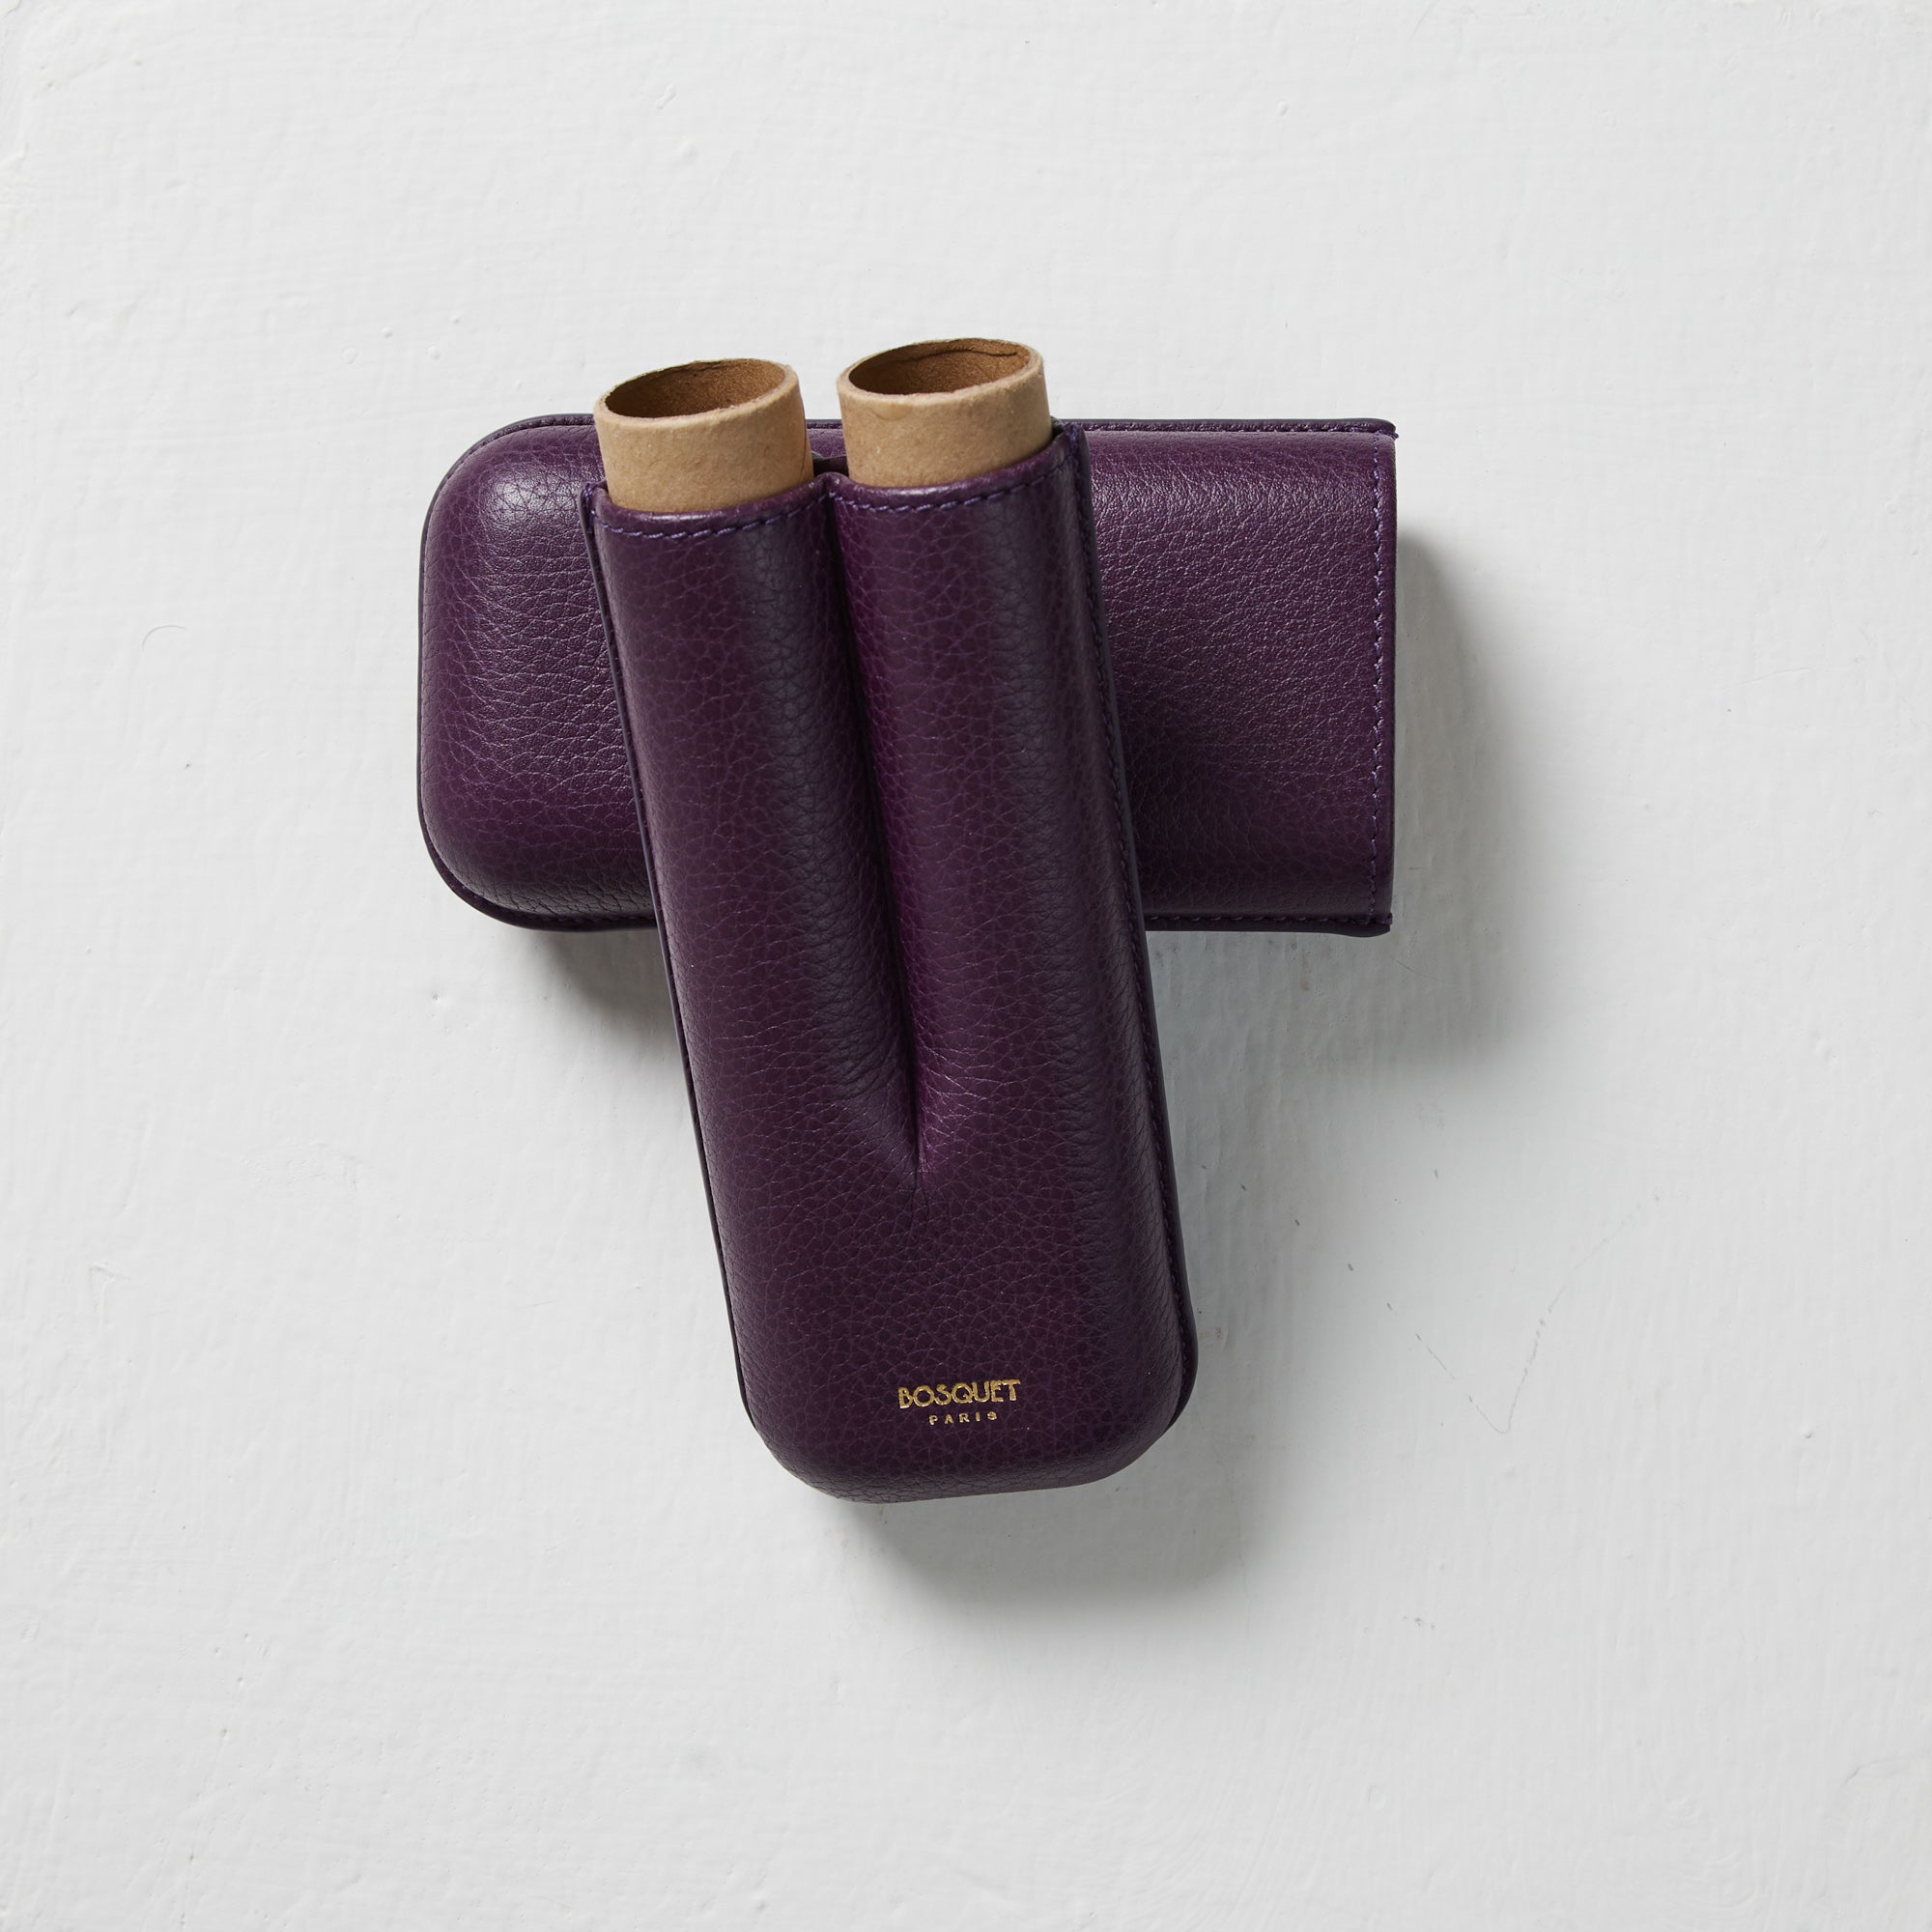 A pair of Bosque Smooth Purple Leather Cigar Cases on a white surface.